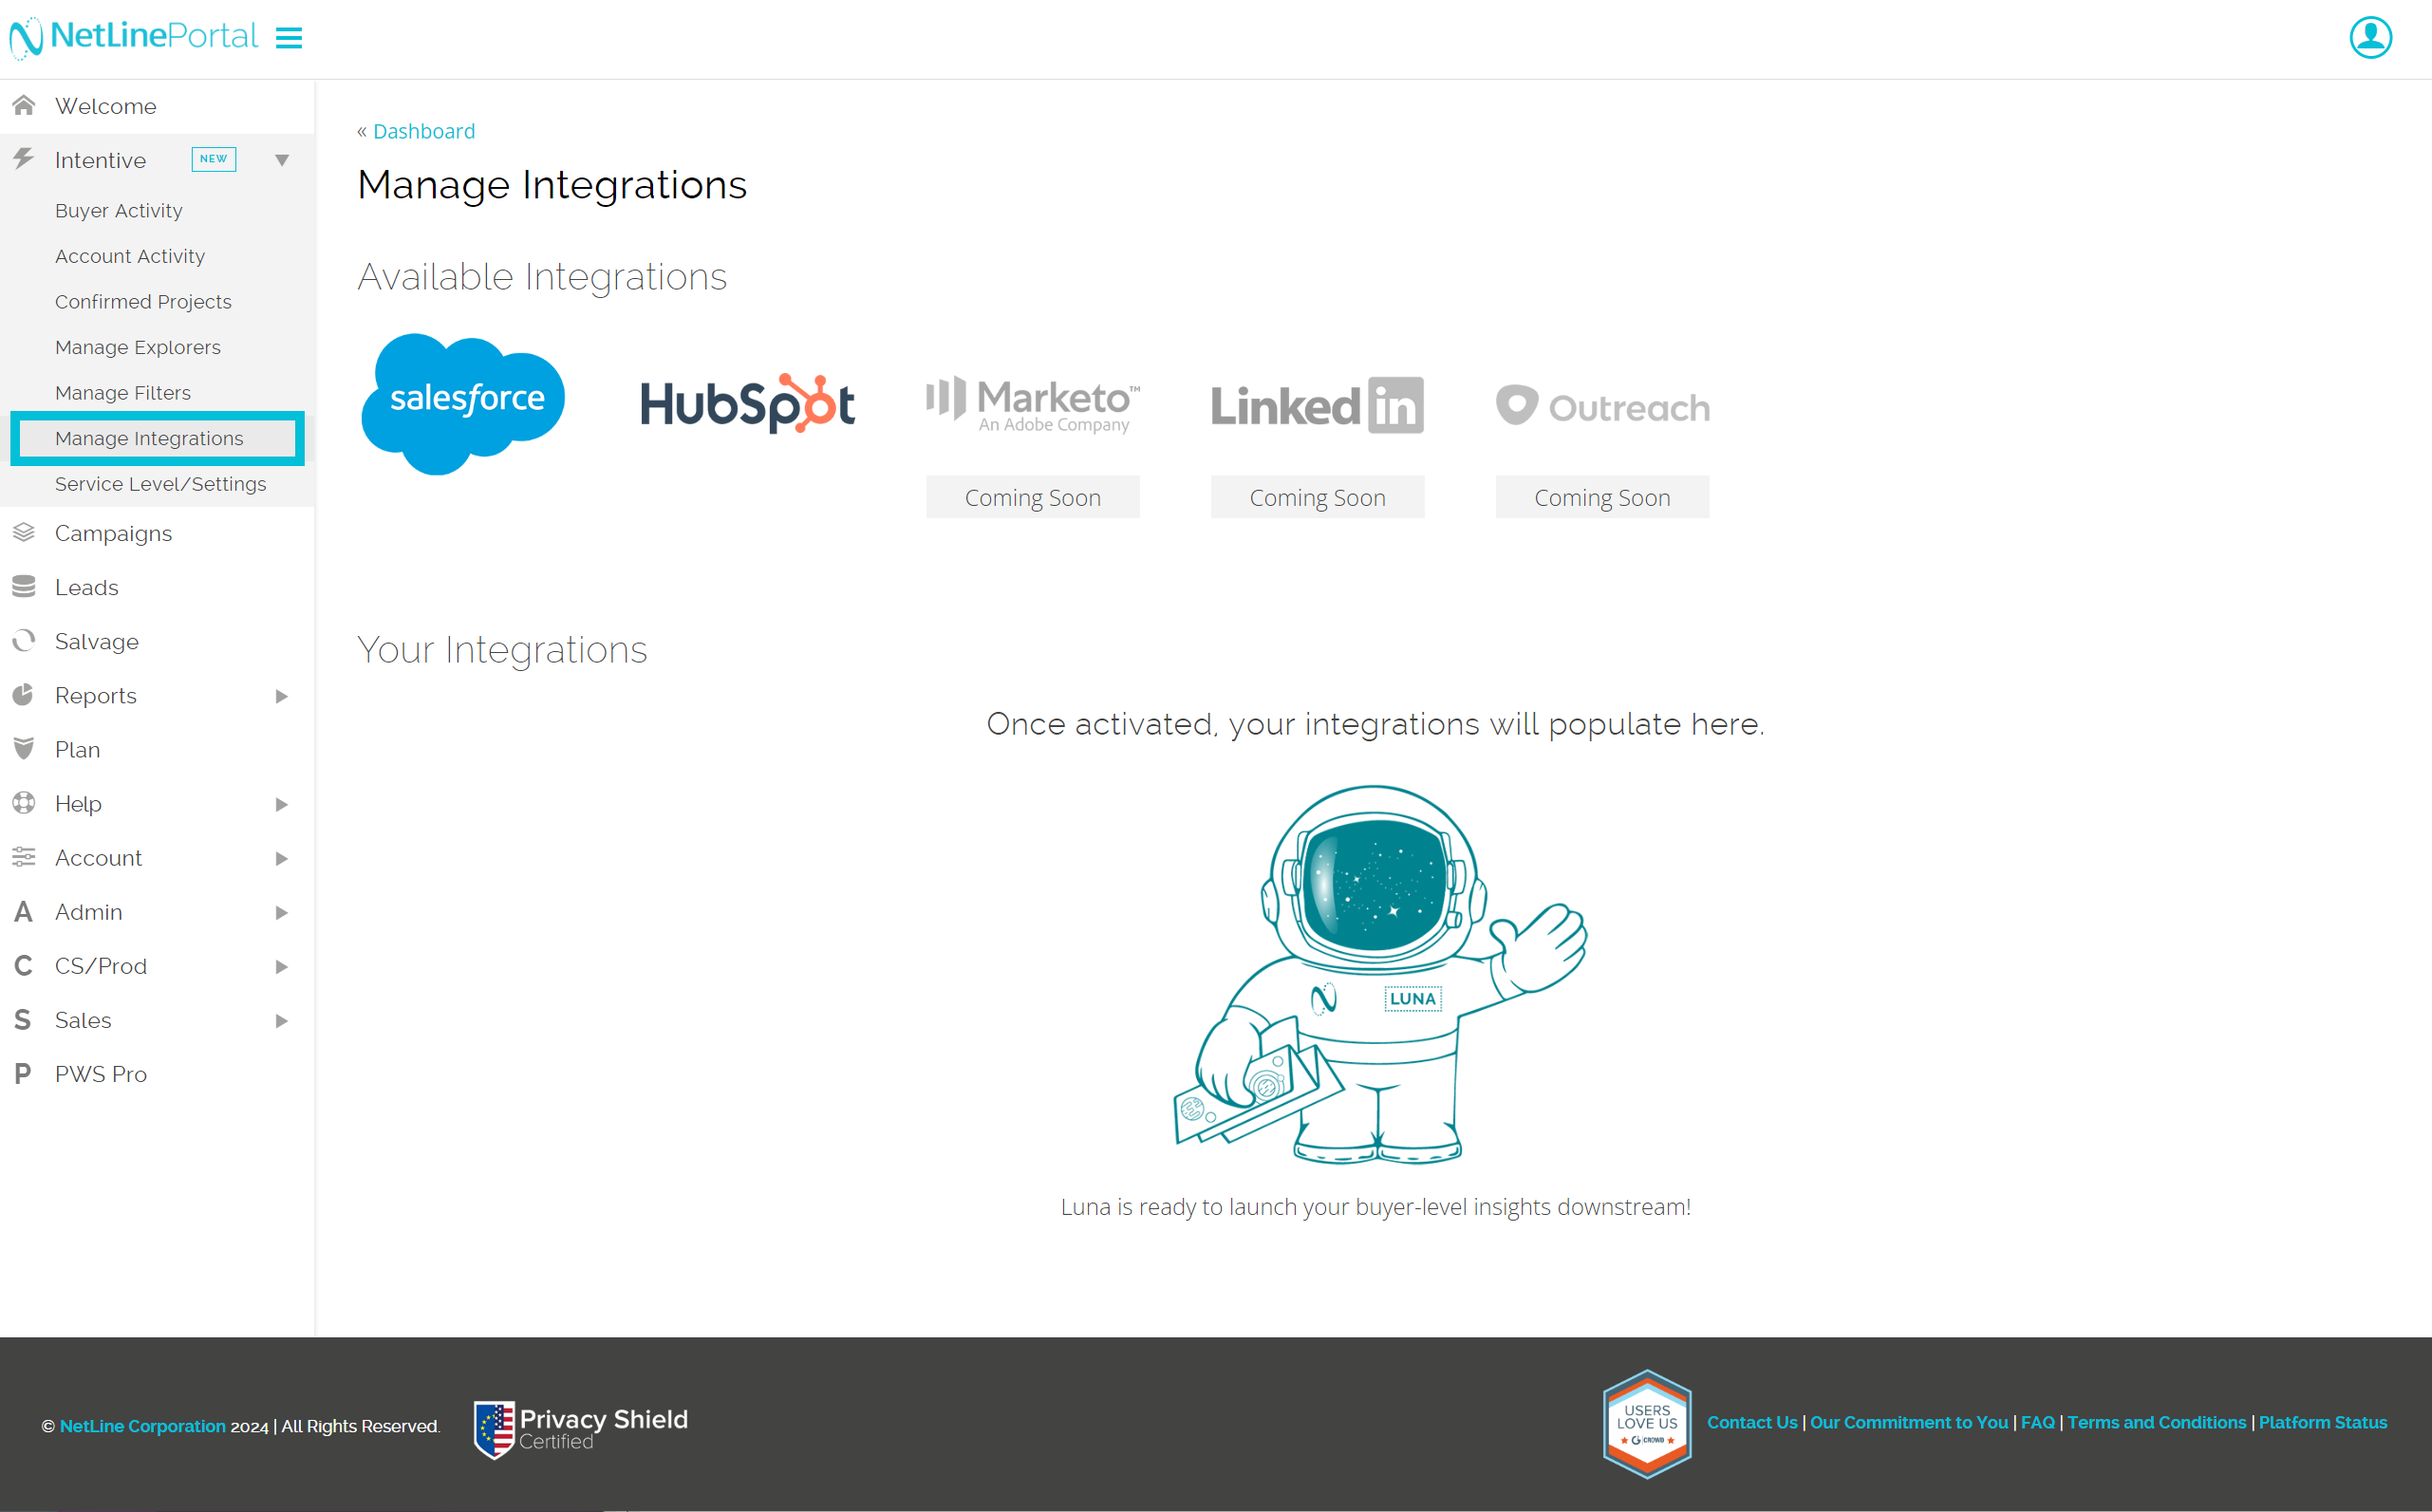 Manage integrations page